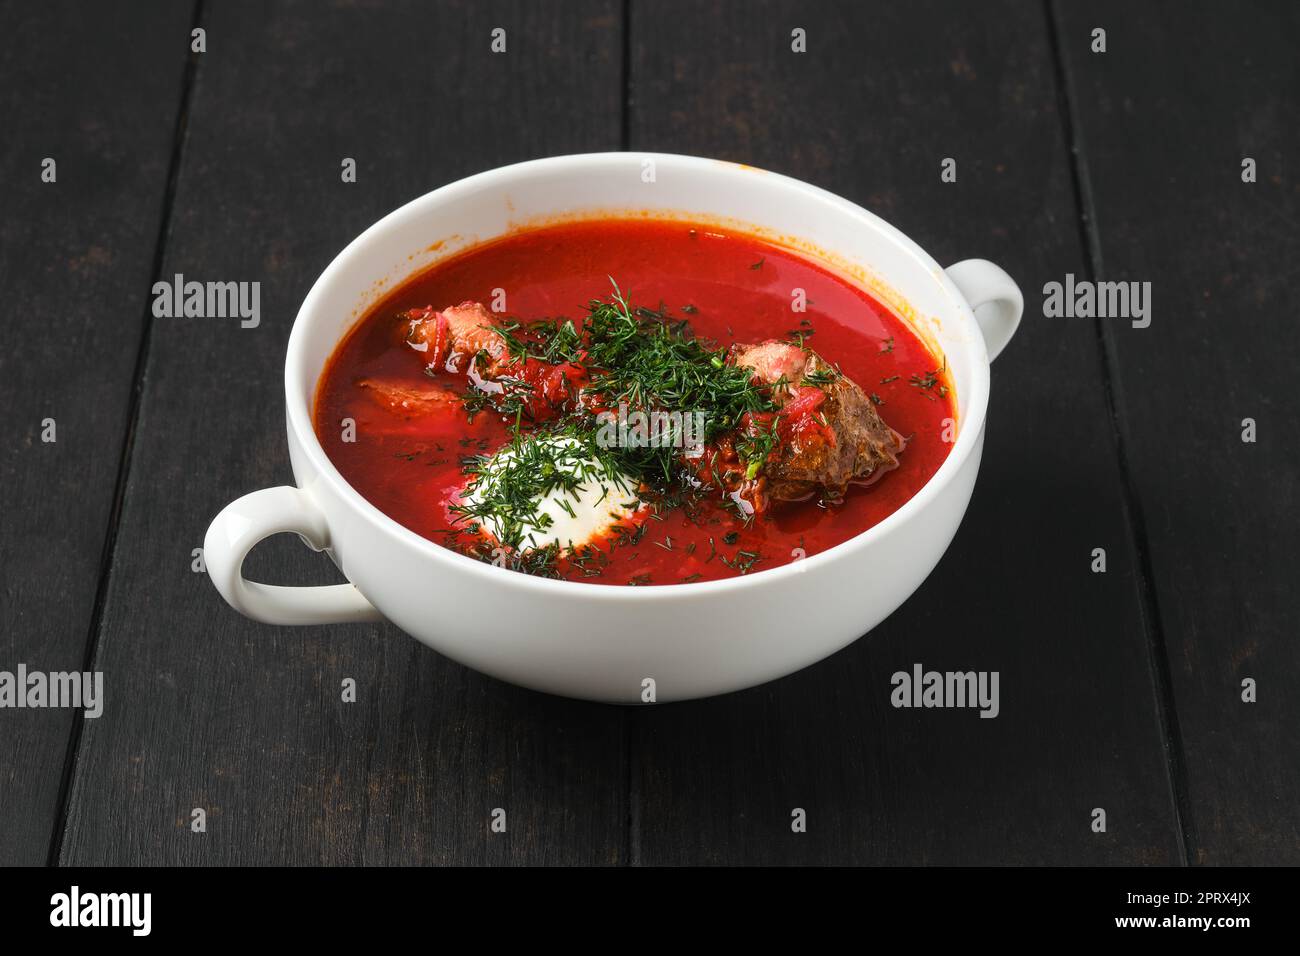 Hot tomato soup with beef rib Stock Photo